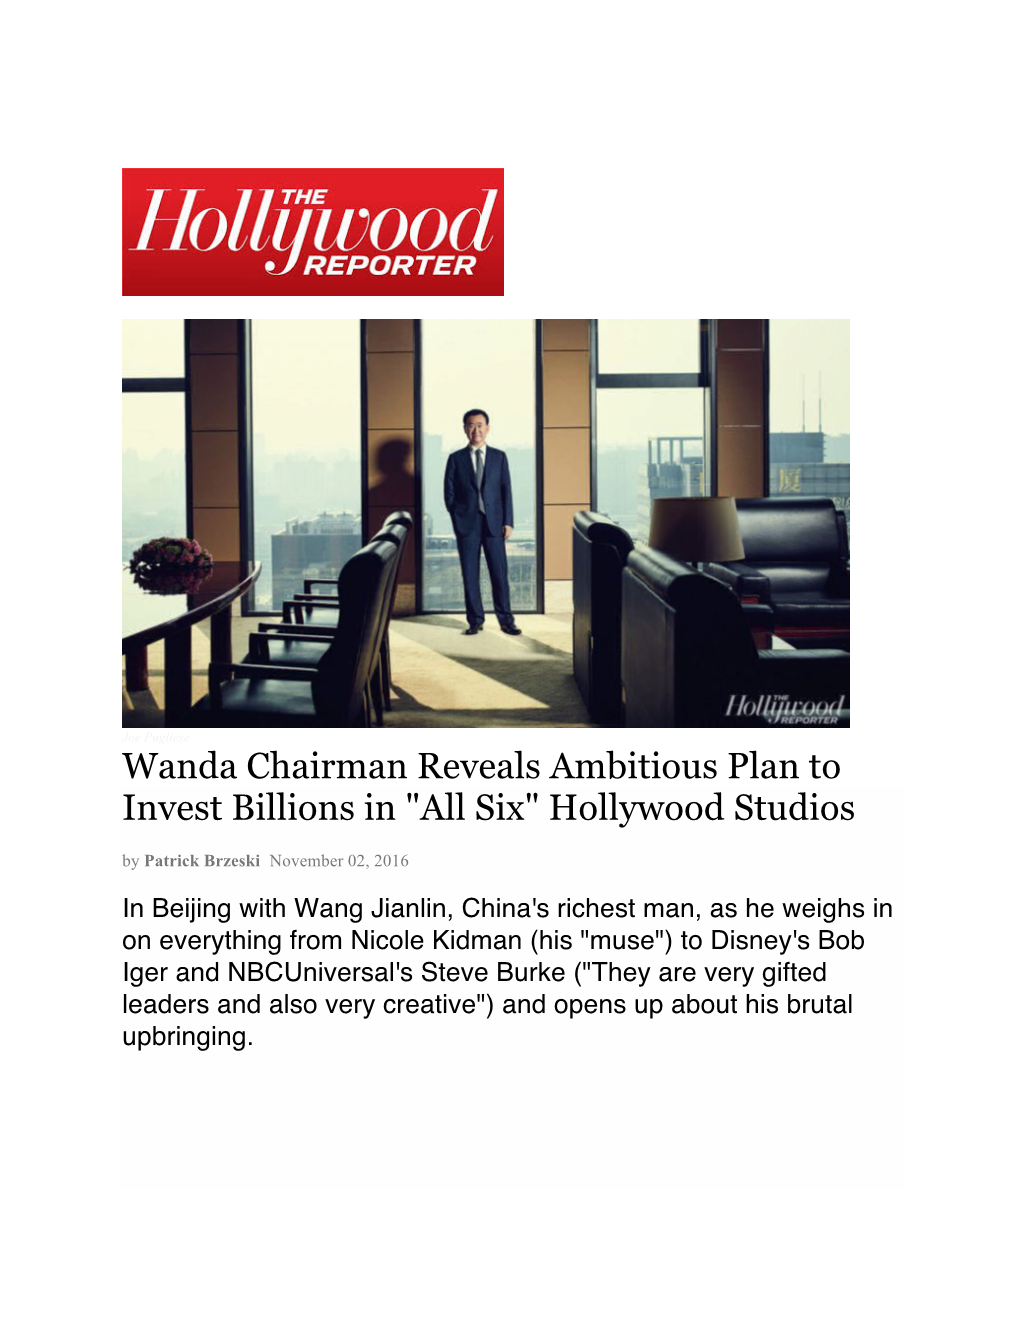 Wanda Chairman Reveals Ambitious Plan to Invest Billions in "All Six" Hollywood Studios by Patrick Brzeski November 02, 2016